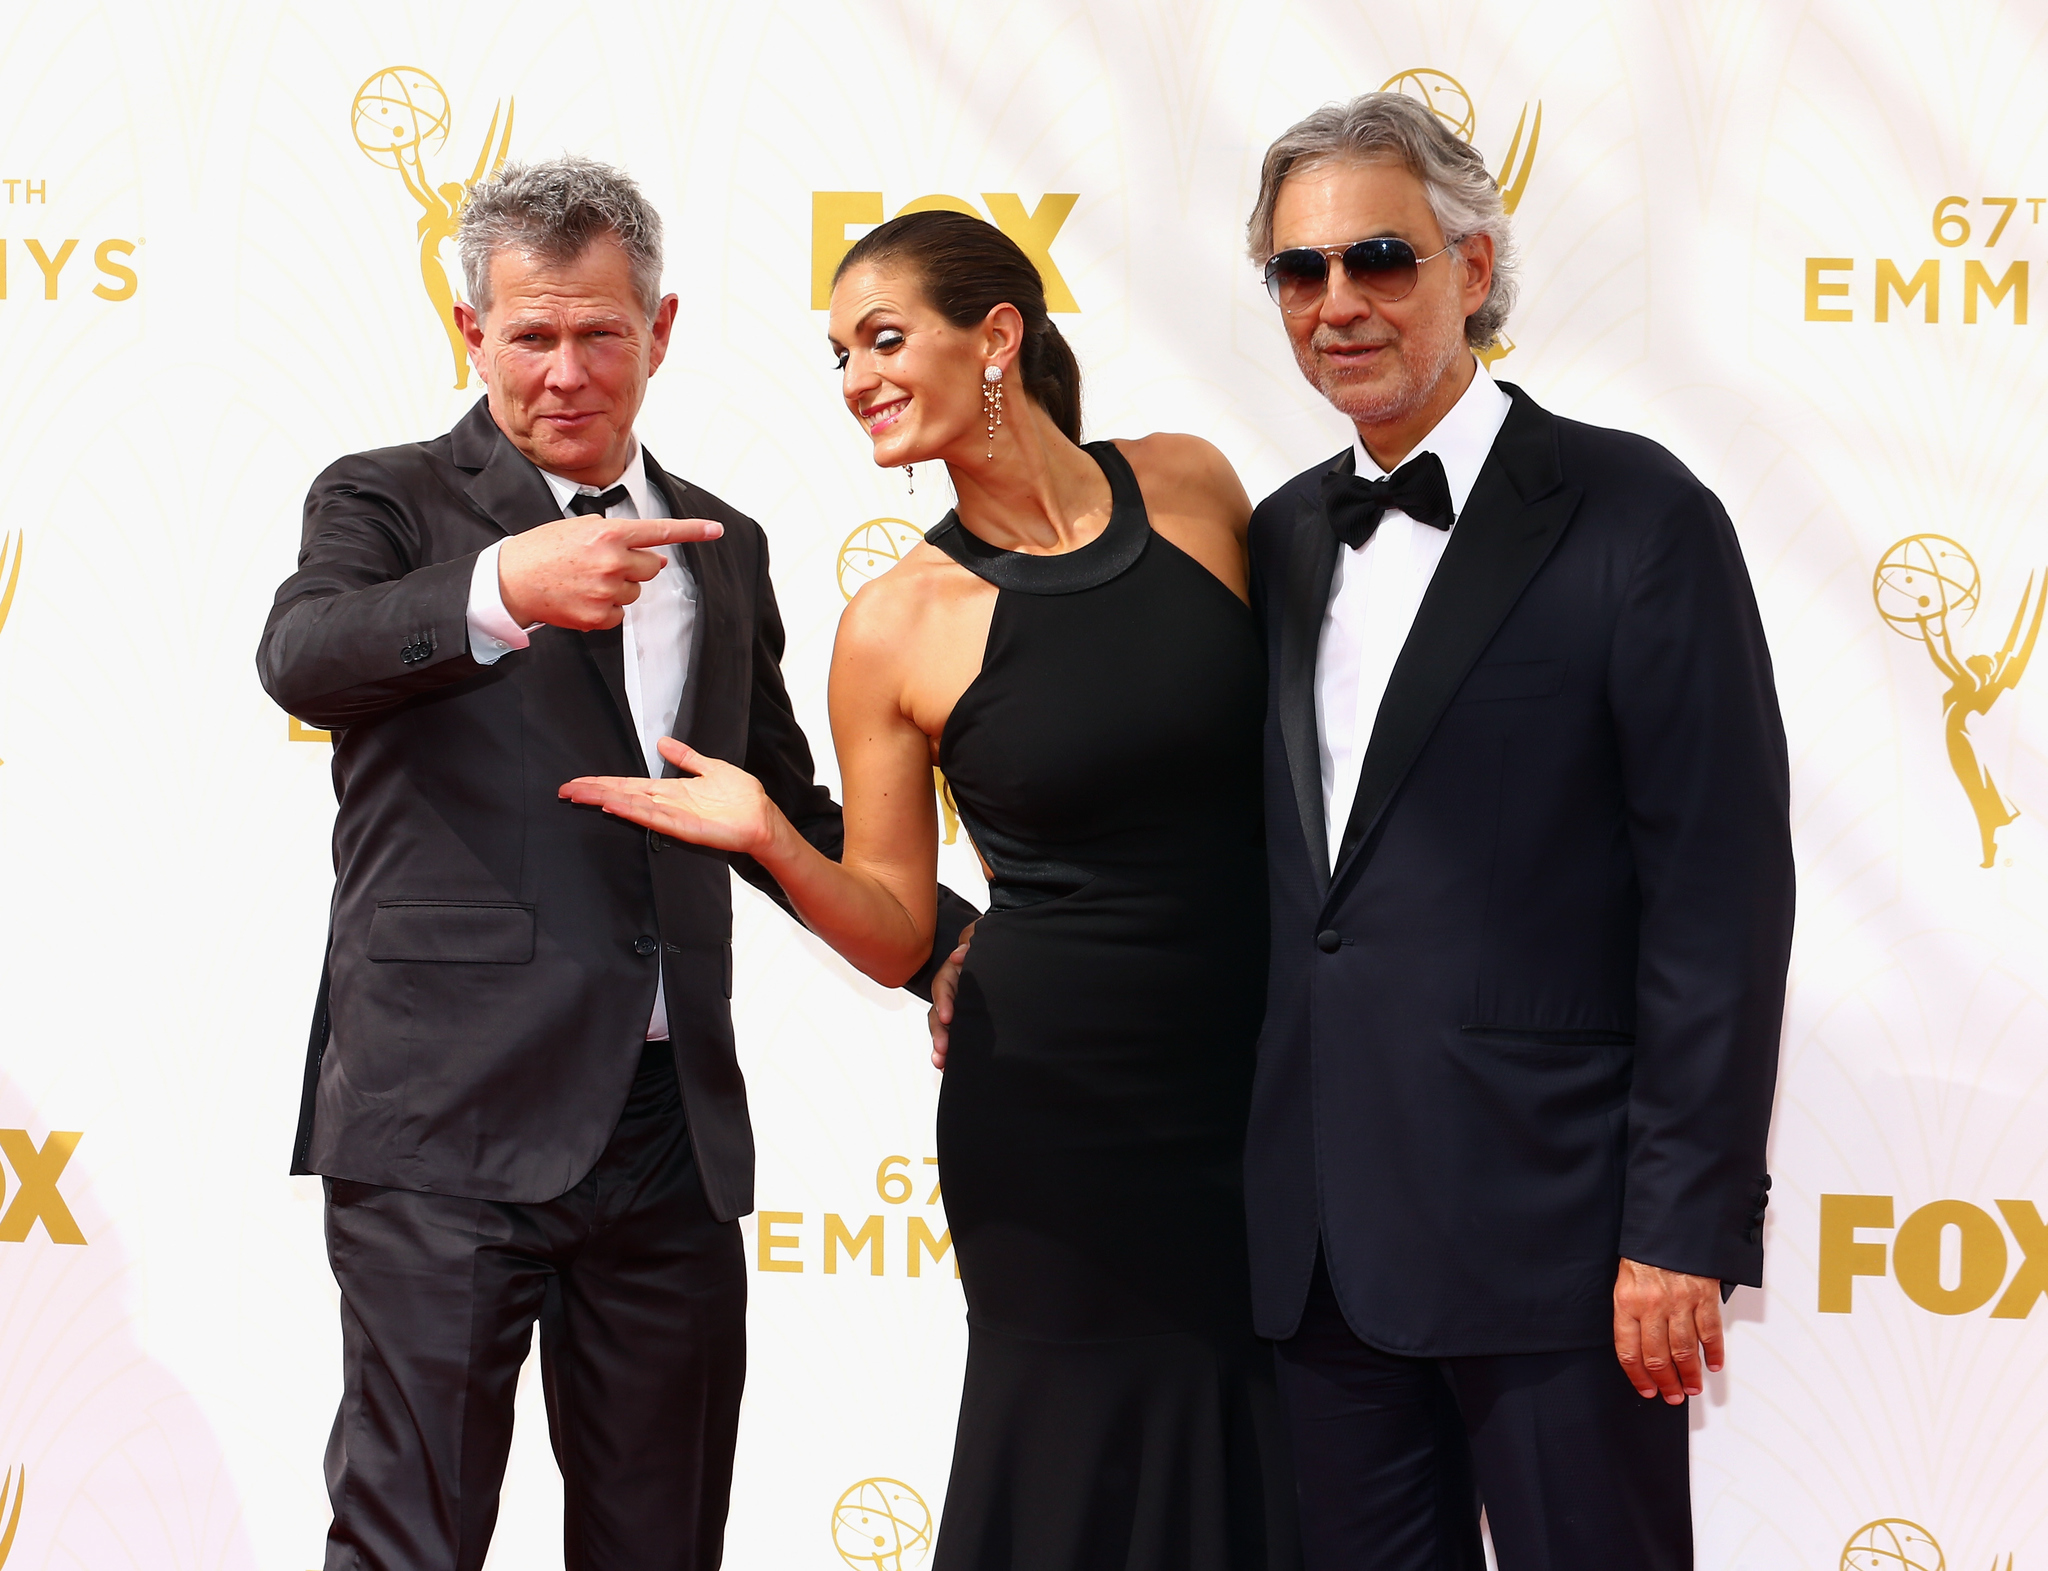 Andrea Bocelli, David Foster and Veronica Berti at event of The 67th Primetime Emmy Awards (2015)